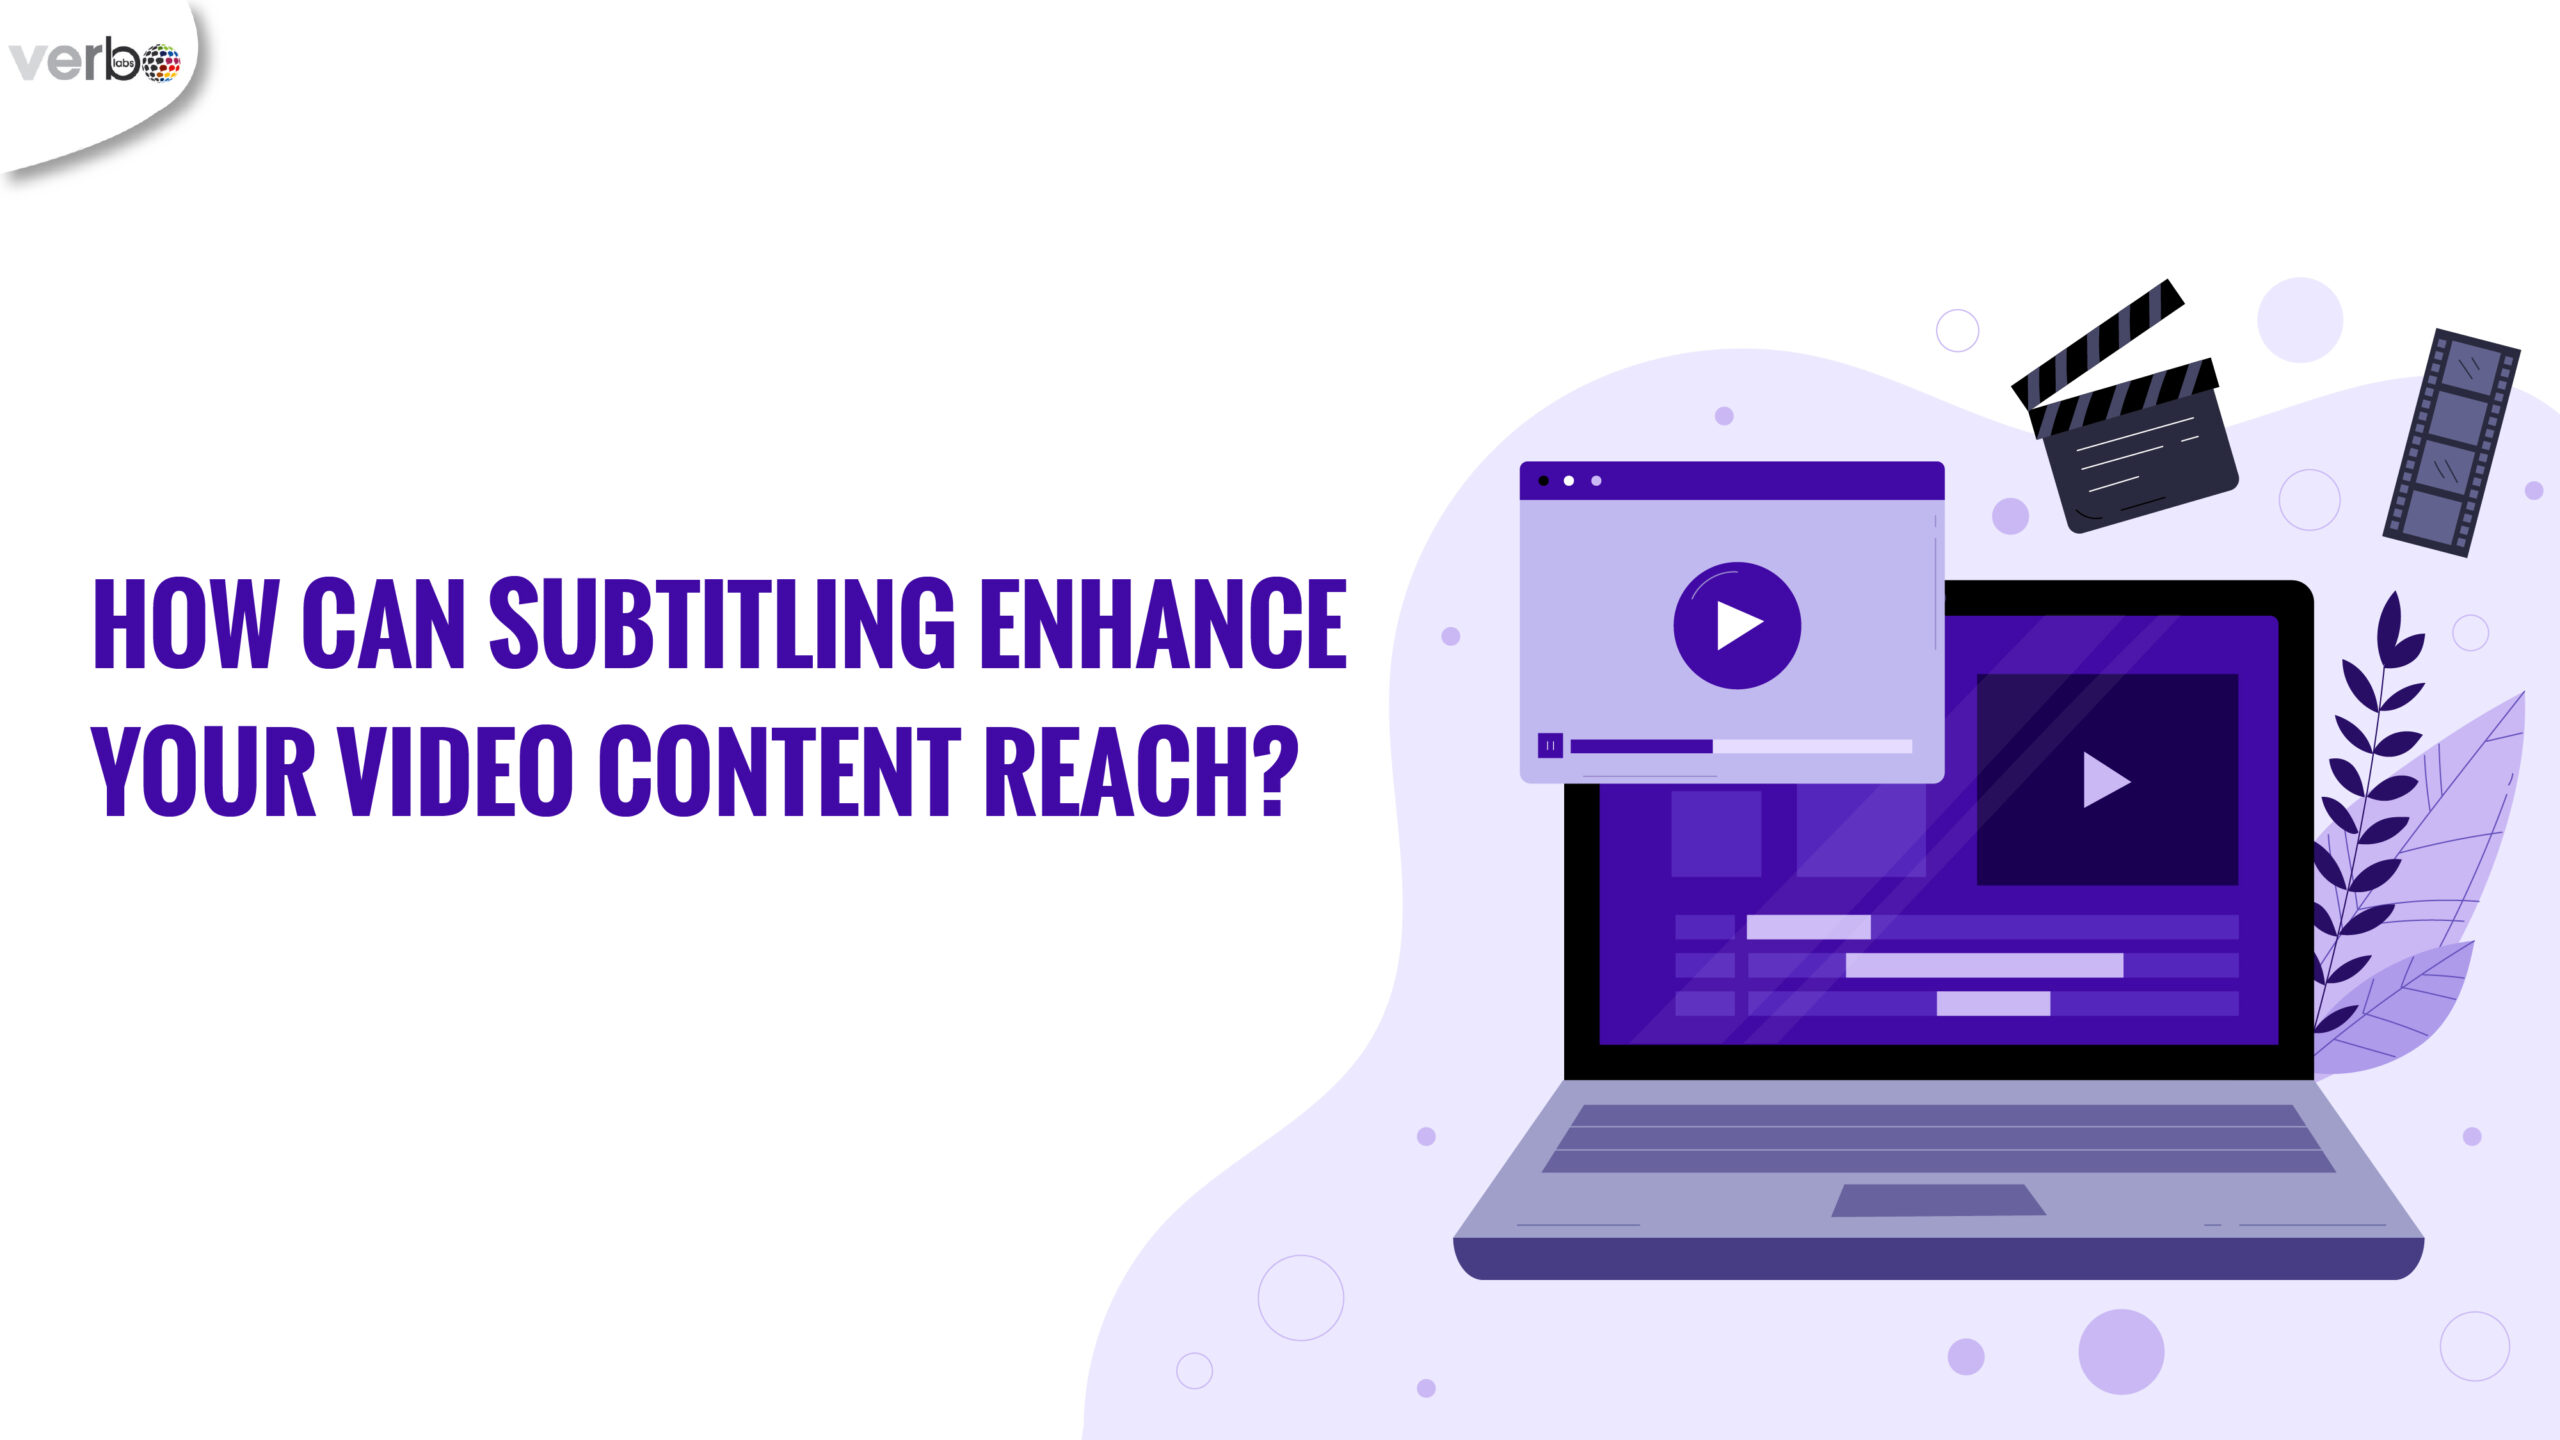 How can subtitling enhance your video content reach?